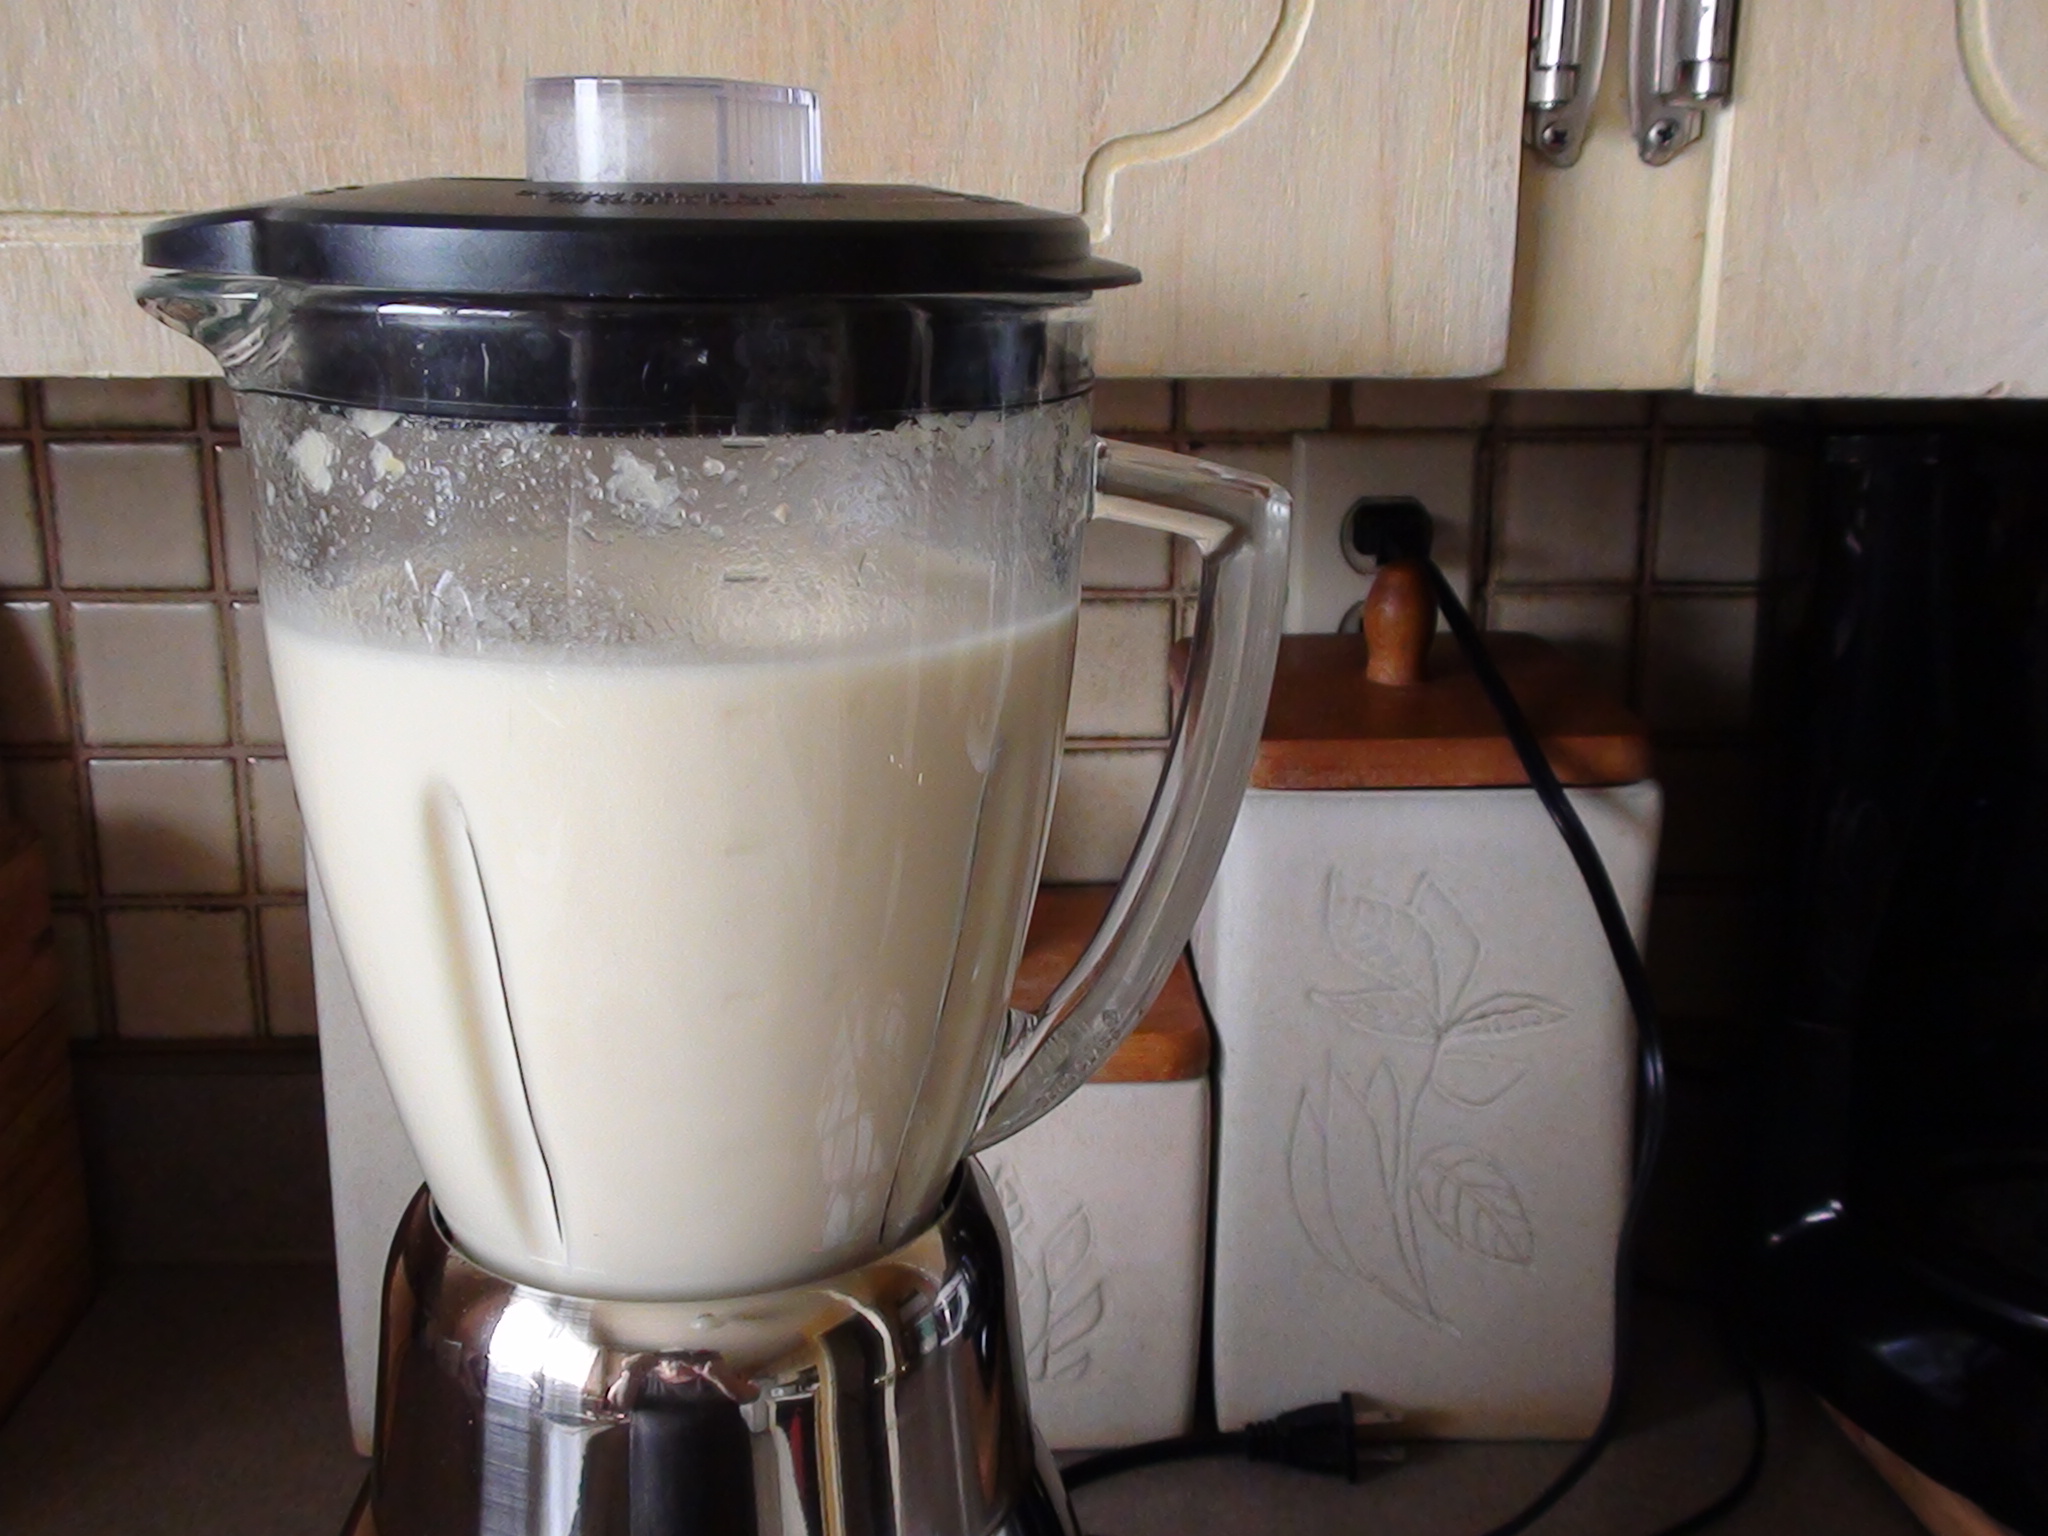 zsuzsa is in the kitchen: PUREE HOT FOOD IN THE BLENDER SAFELY